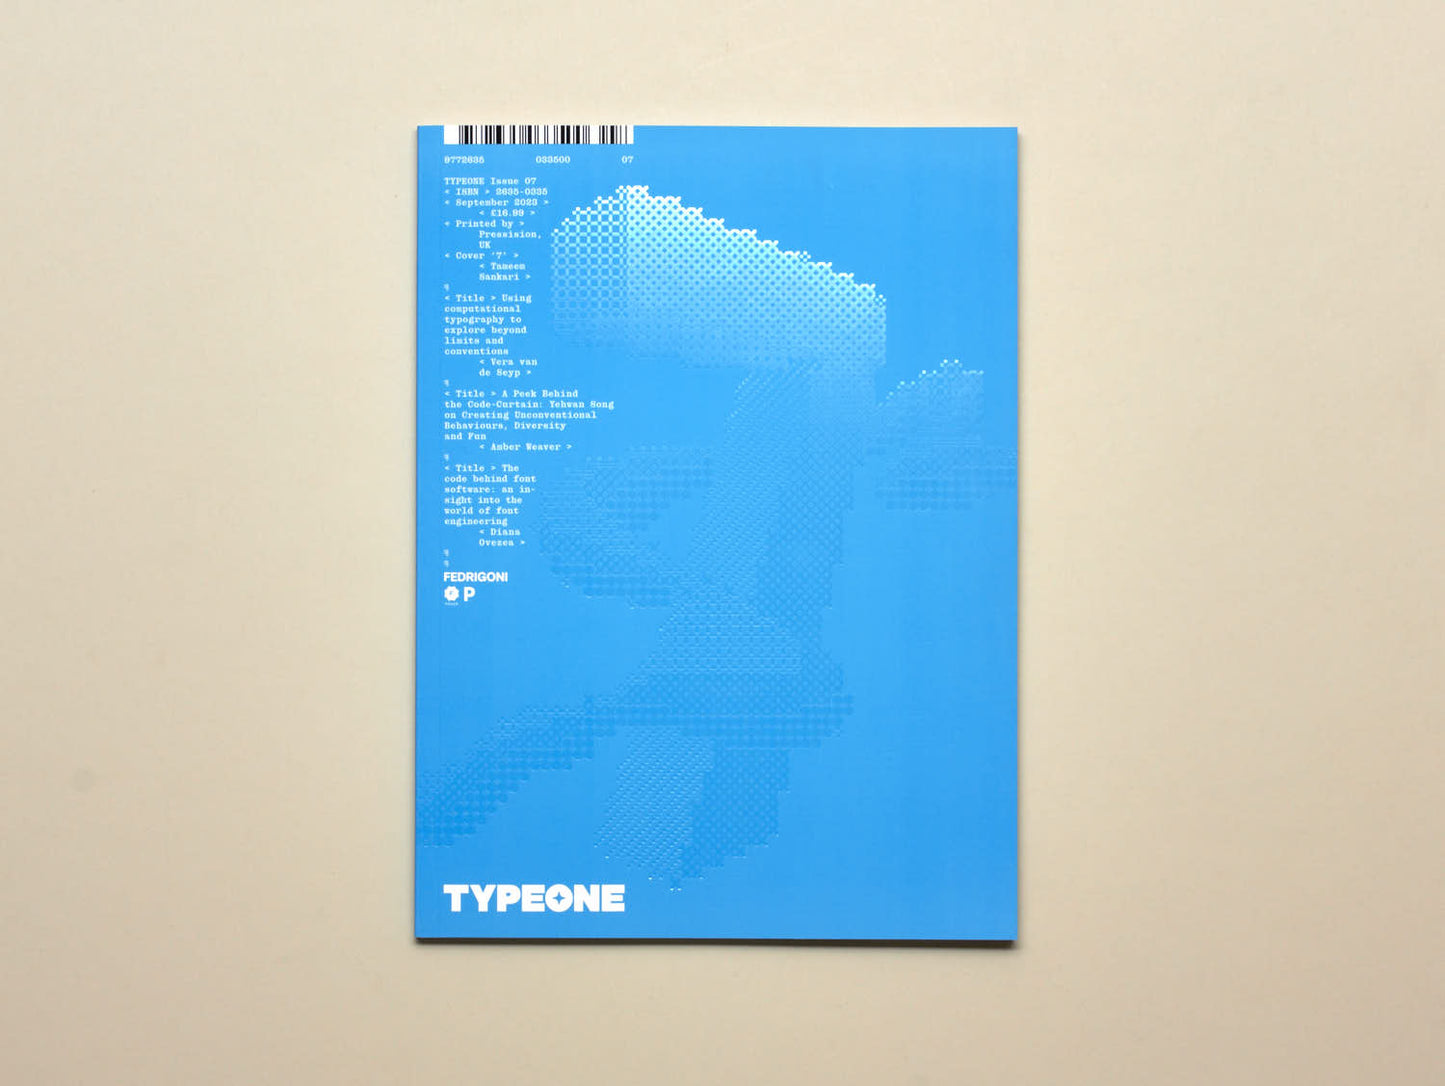 Typeone, #7– The Creative Coding Issue